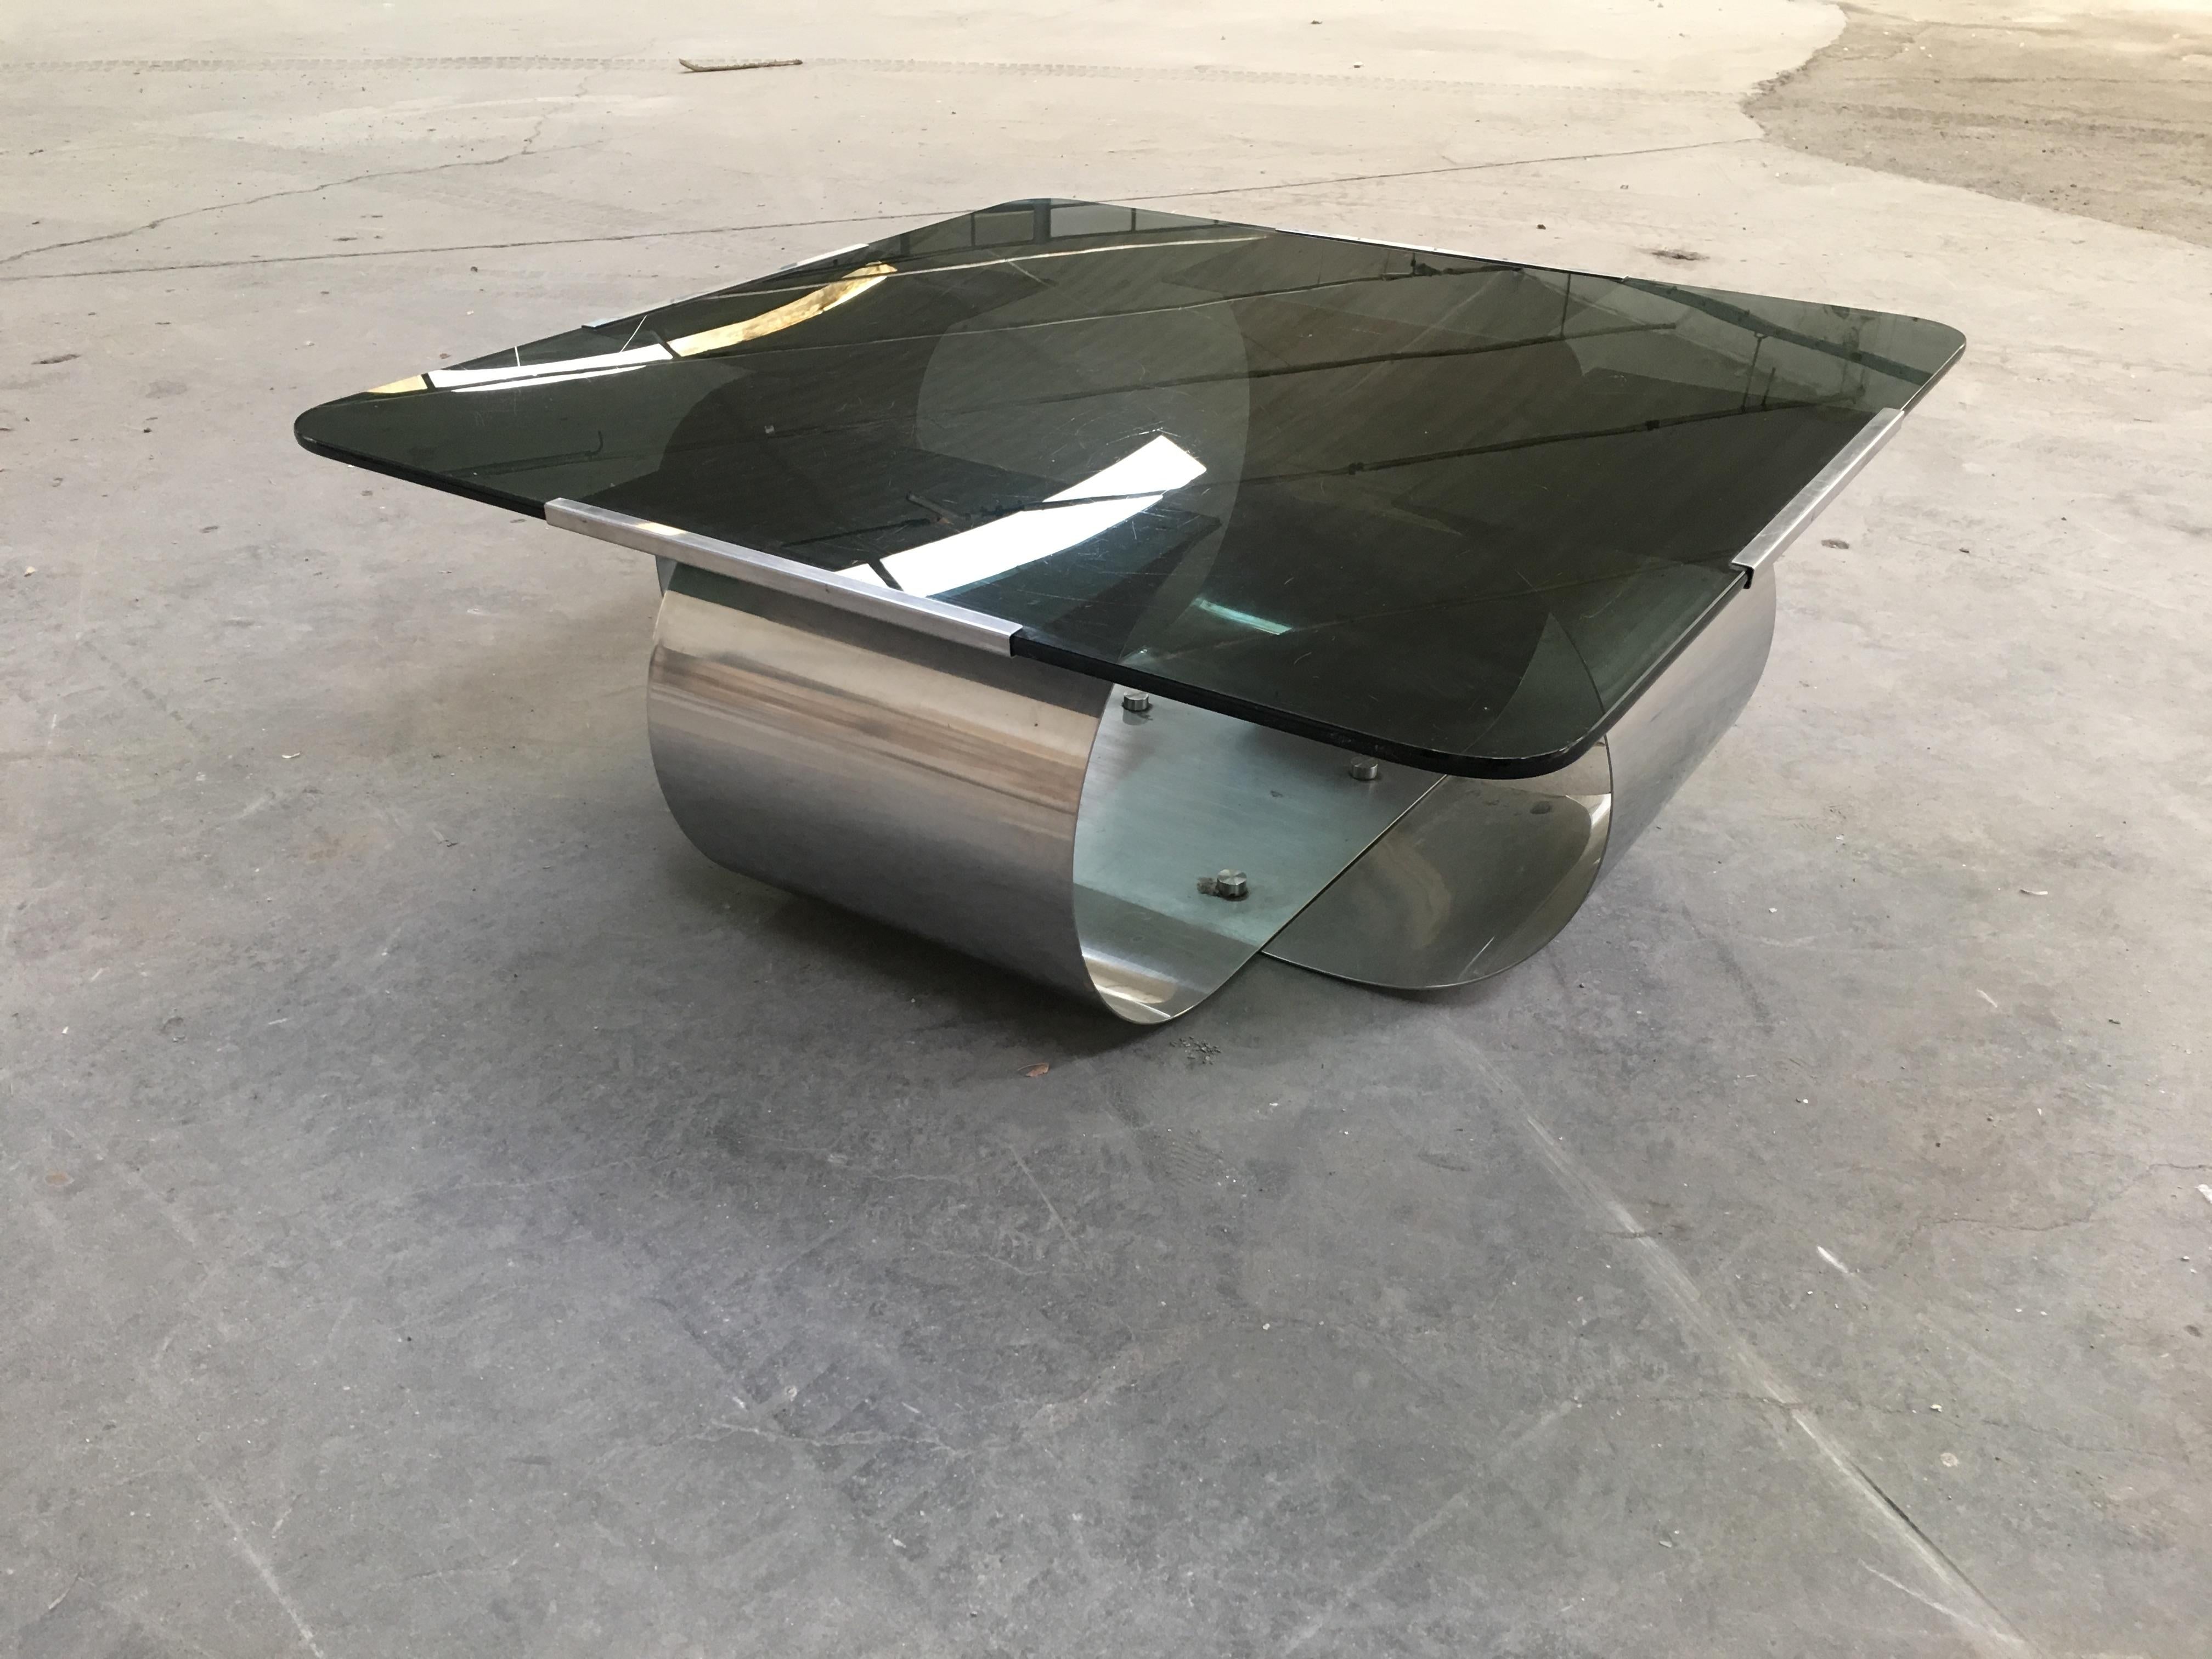 Mid-Century Modern French stainless steel coffee table with smoked glass top by François Monnet, 1970s.